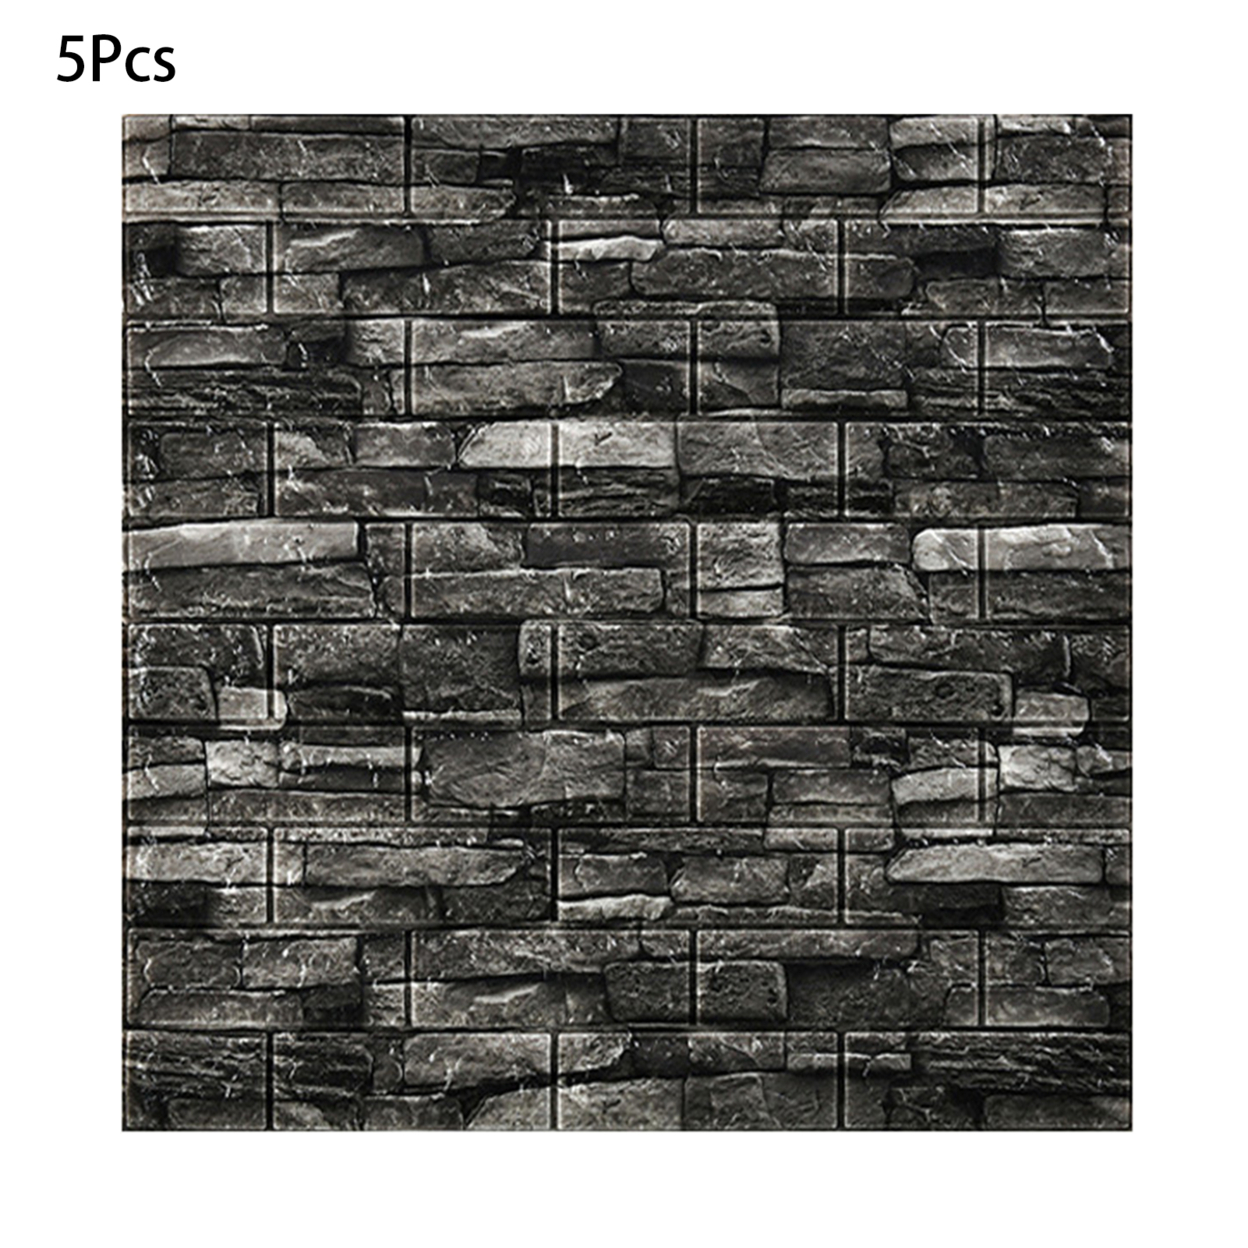 5Pcs Wall Stickers Lightweight Nice-looking Convenient 3D Wall Decals Brick Pattern Wallpapers for Home - black